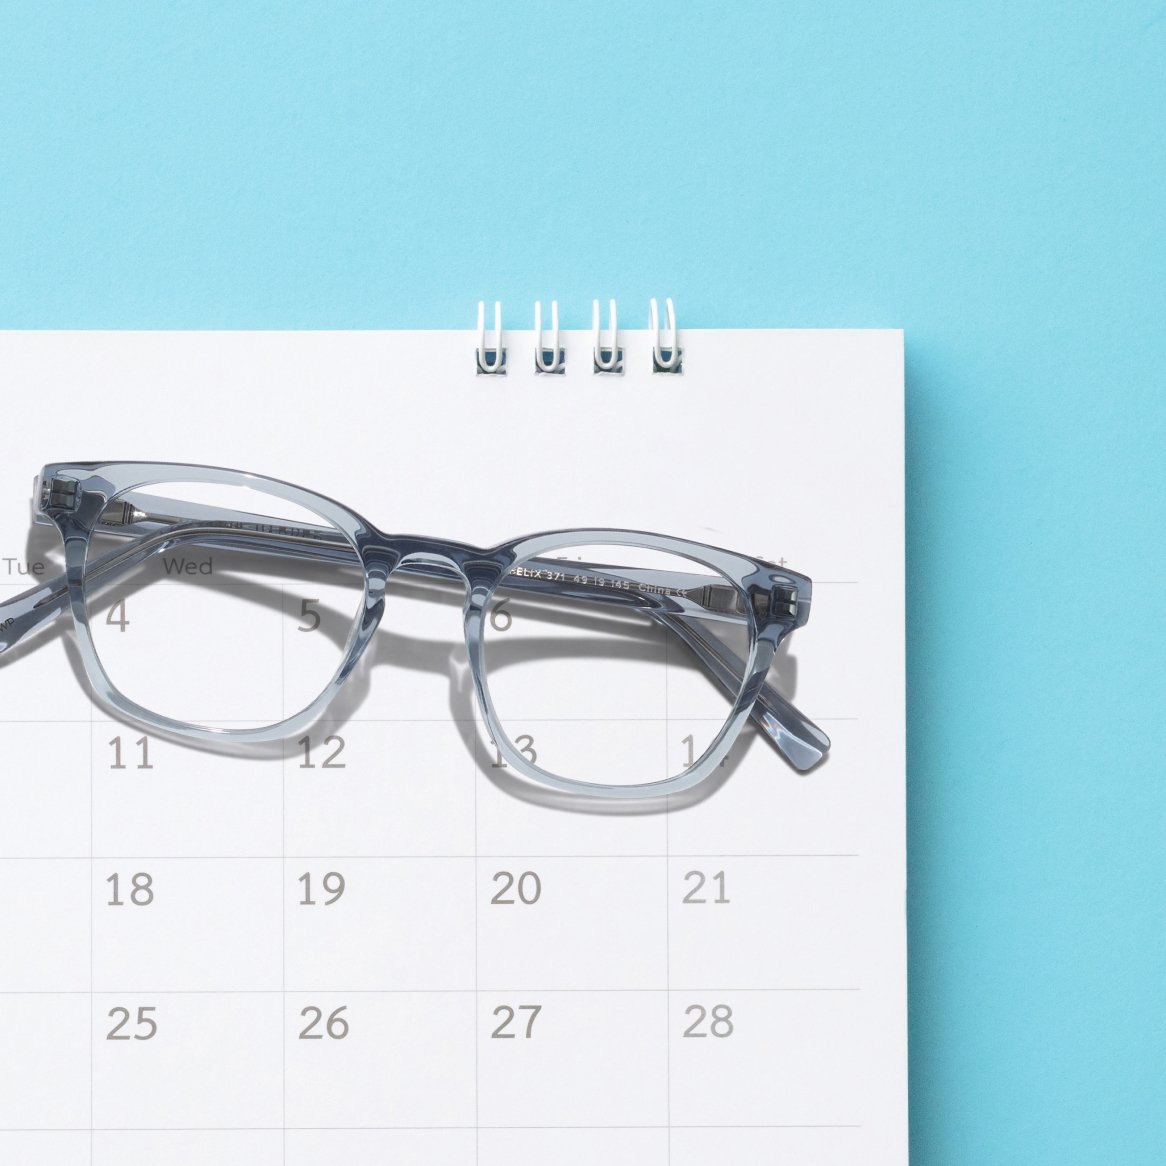 A pair of glasses on top of a calendar